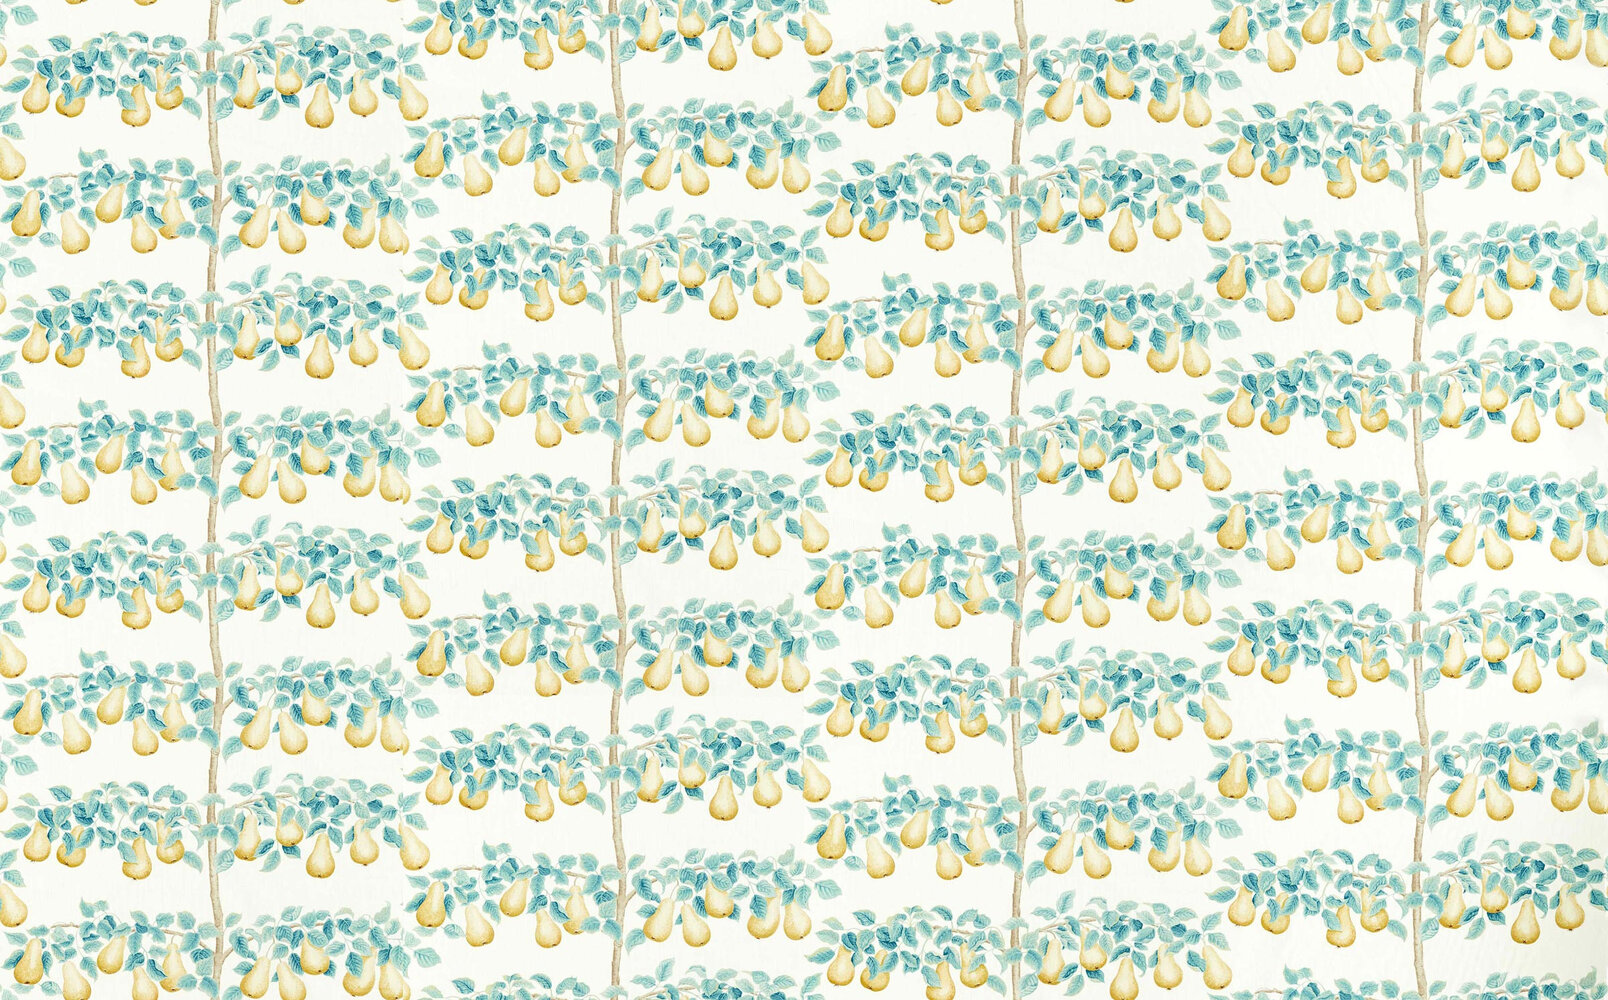 Perry Pears Fabric - Gold / Aqua - by Sanderson